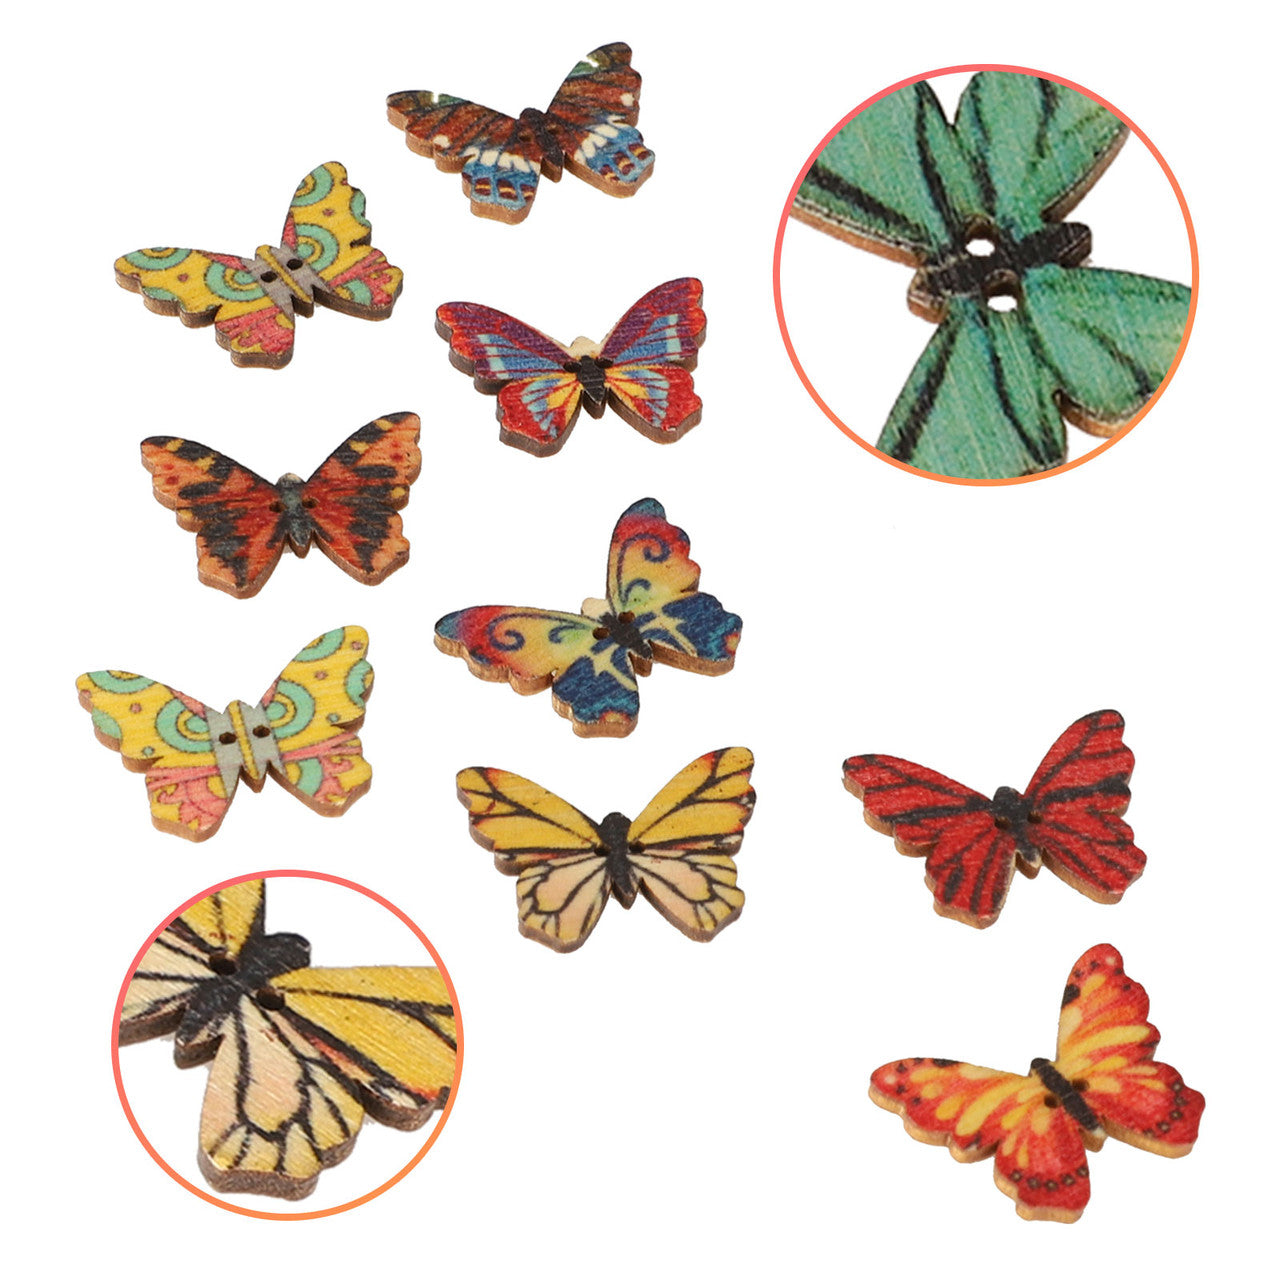 Butterfly-shaped Wooden Buttons Novelty Mixed Color Random Fashion Round, 2 Holes Buttons for DIY Sewing Crafting Scrapbook Retro Pattern Decorative Cartoon Button, 1 Inch, 100Pcs